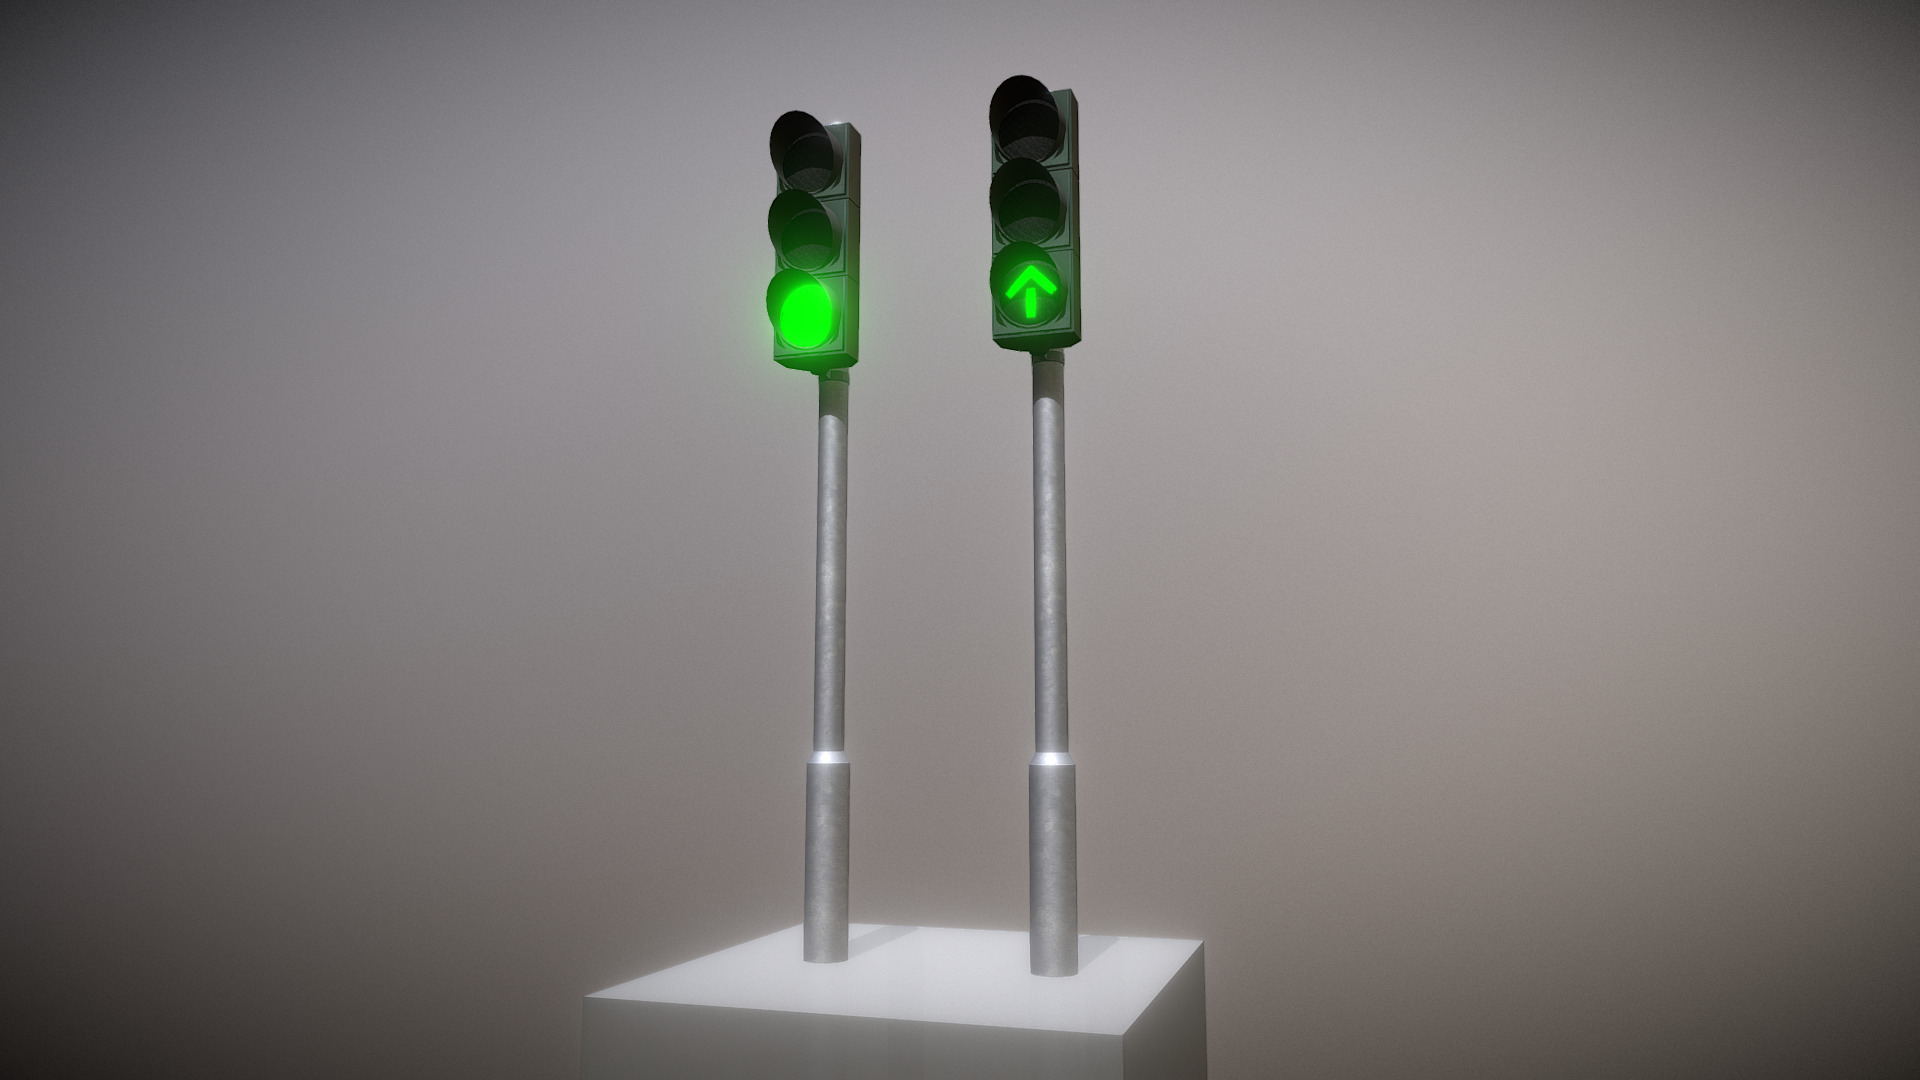 3D model Autofahrer Ampel - This is a 3D model of the Autofahrer Ampel. The 3D model is about a green light on a stand.